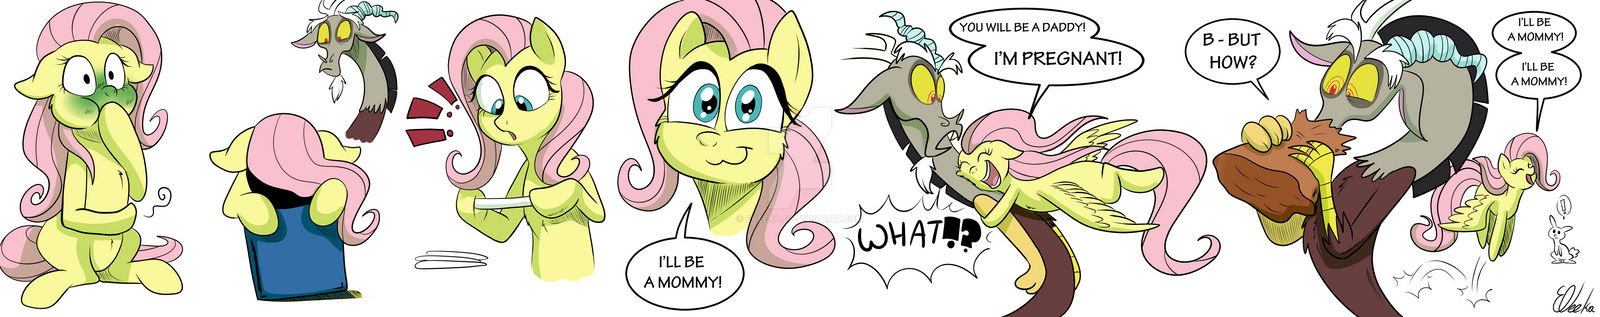 [MLP FIM] I'll be a mommy!